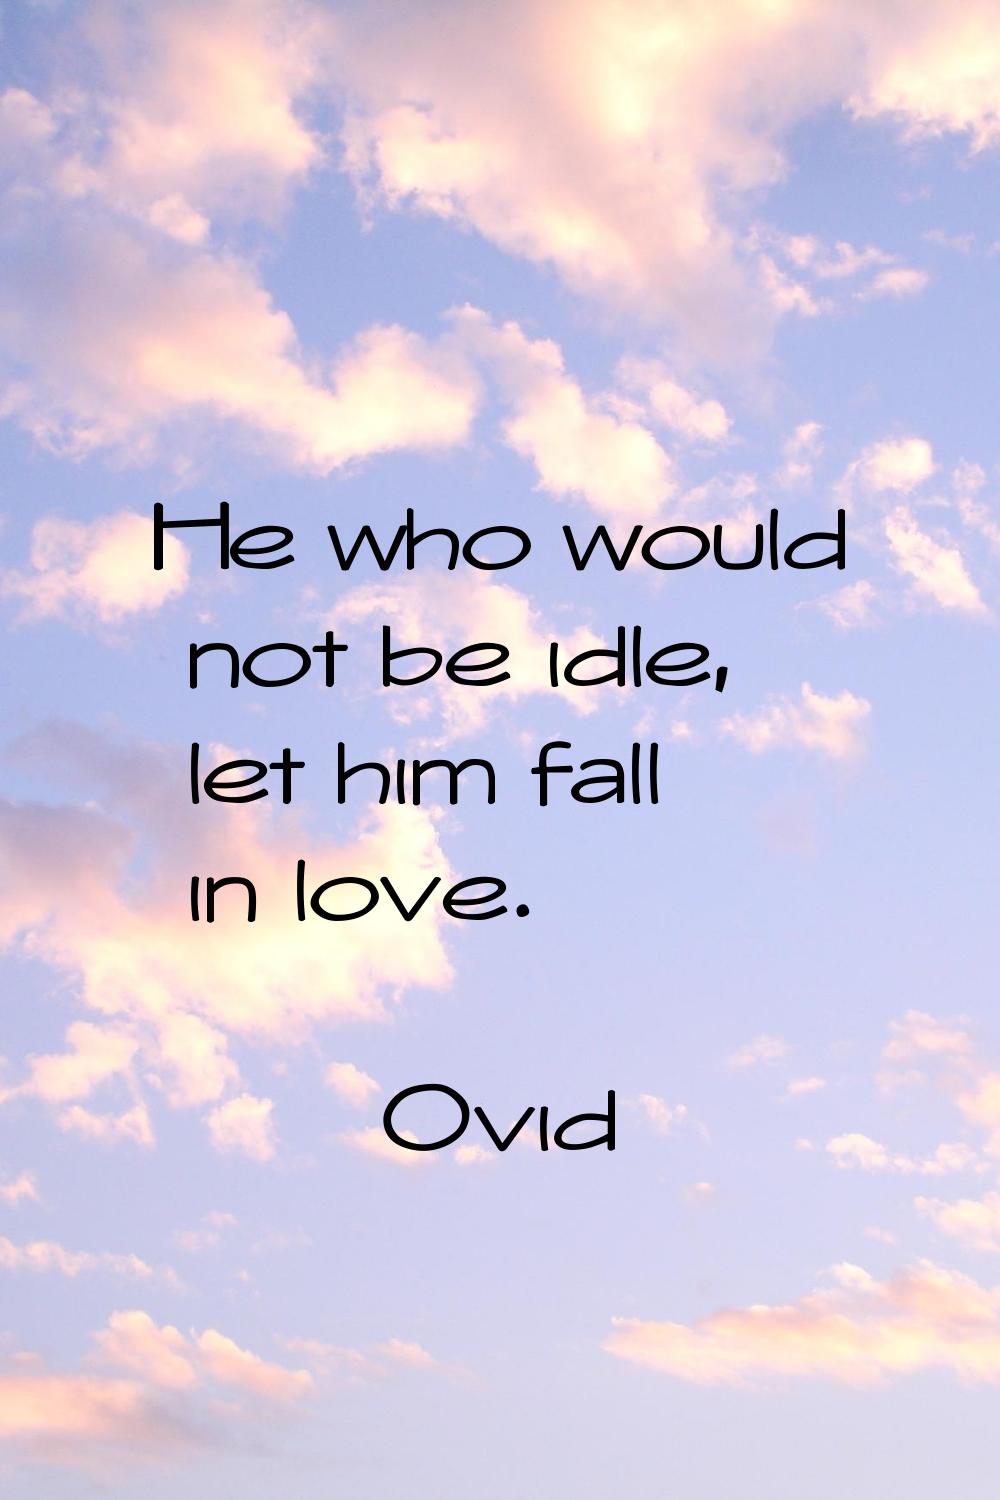 He who would not be idle, let him fall in love.